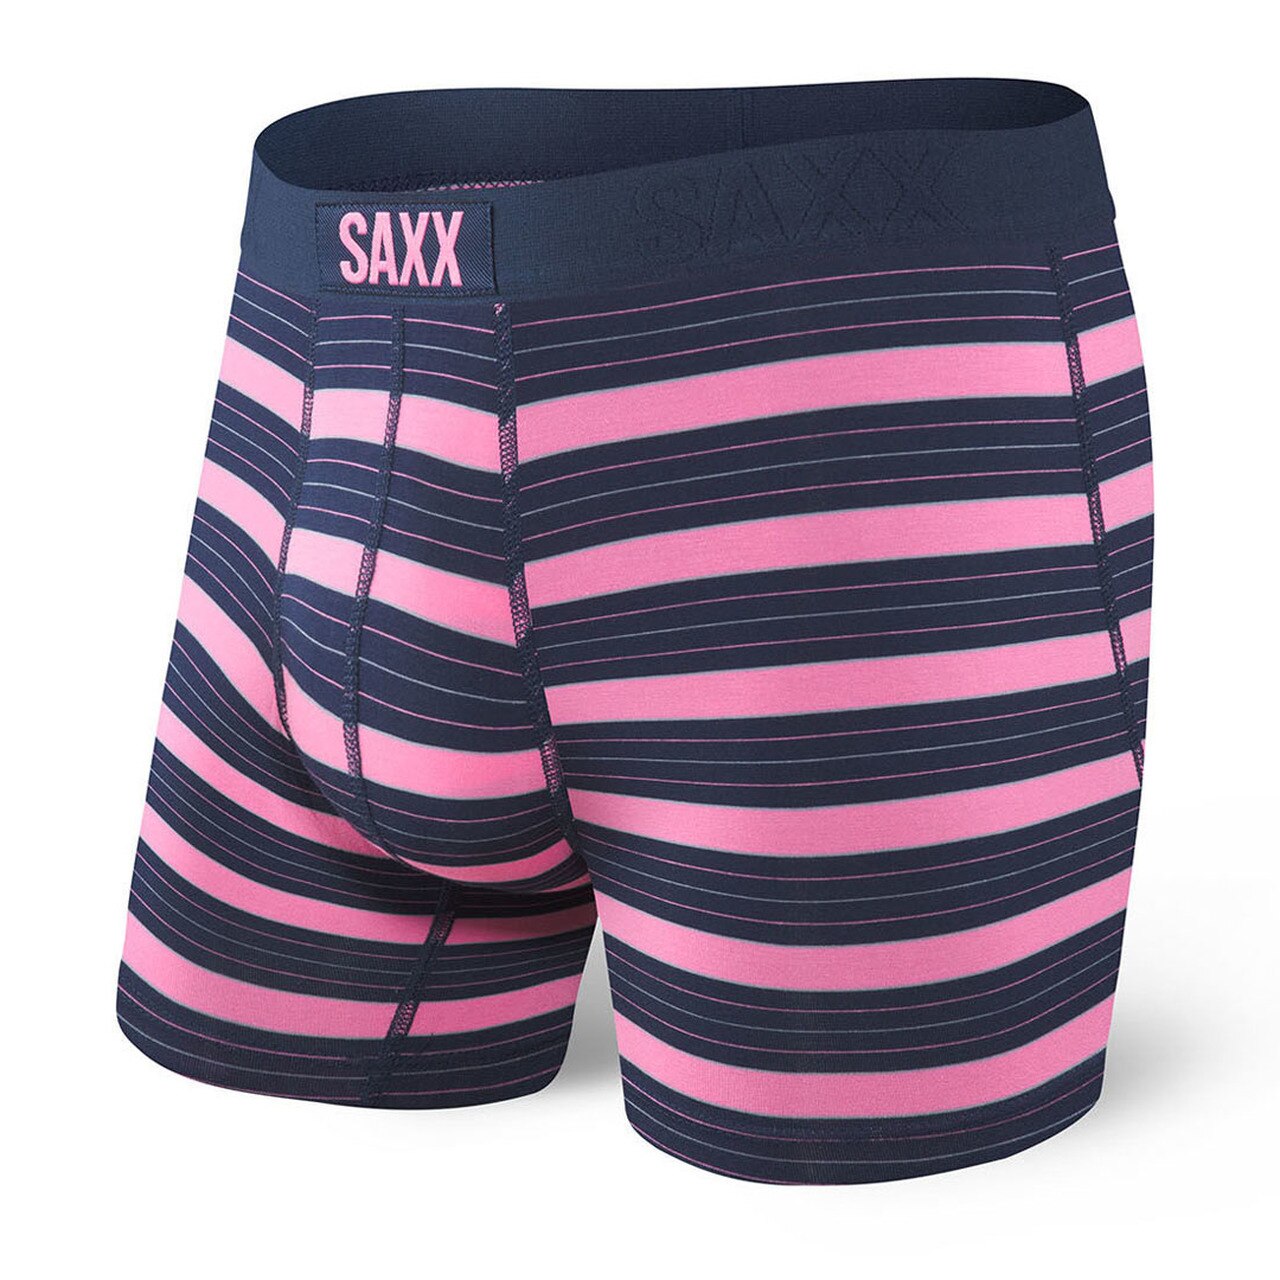 SAXX Boxer Quest SXBM35 ARN Choose 1 or more styles of your choice